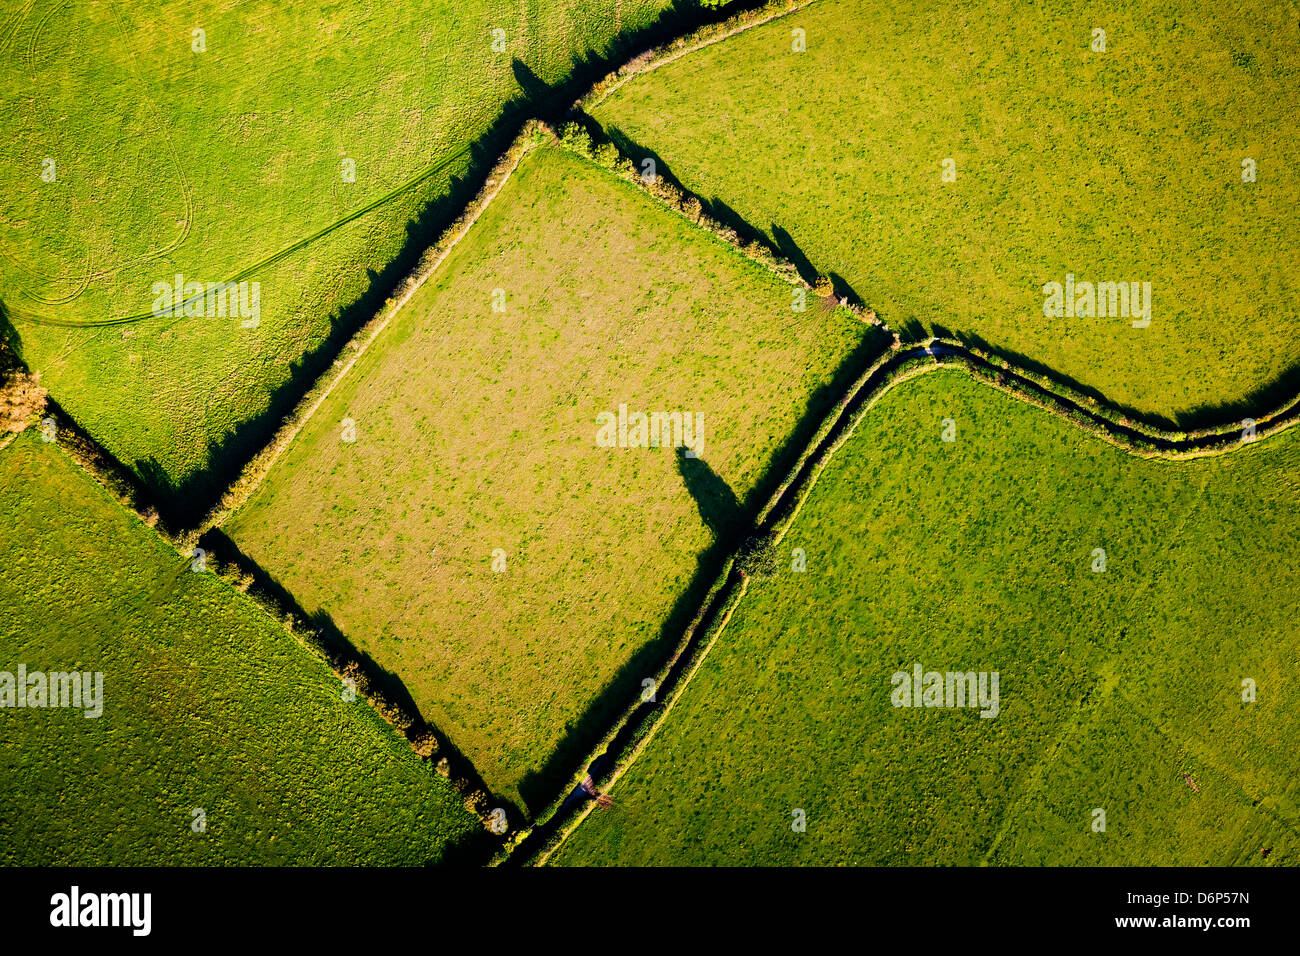 Aerial view showing geometric lines and shapes made by field boundaries in British countryside. Stock Photo